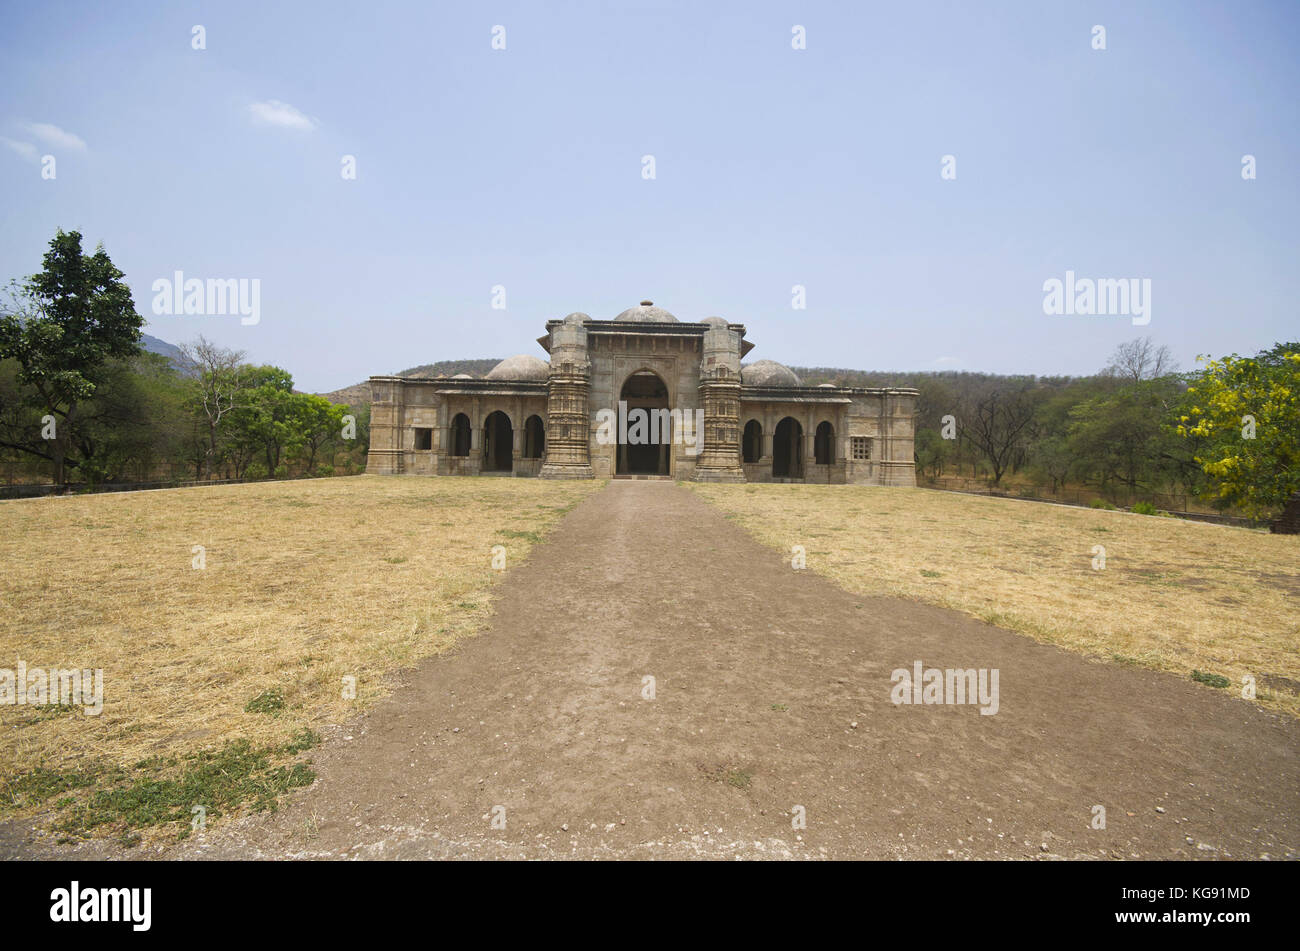 Outer view of Nagina Masjid (Mosque), built with pure white stone, UNESCO protected Champaner - Pavagadh Archaeological Park, Gujarat, India Stock Photo